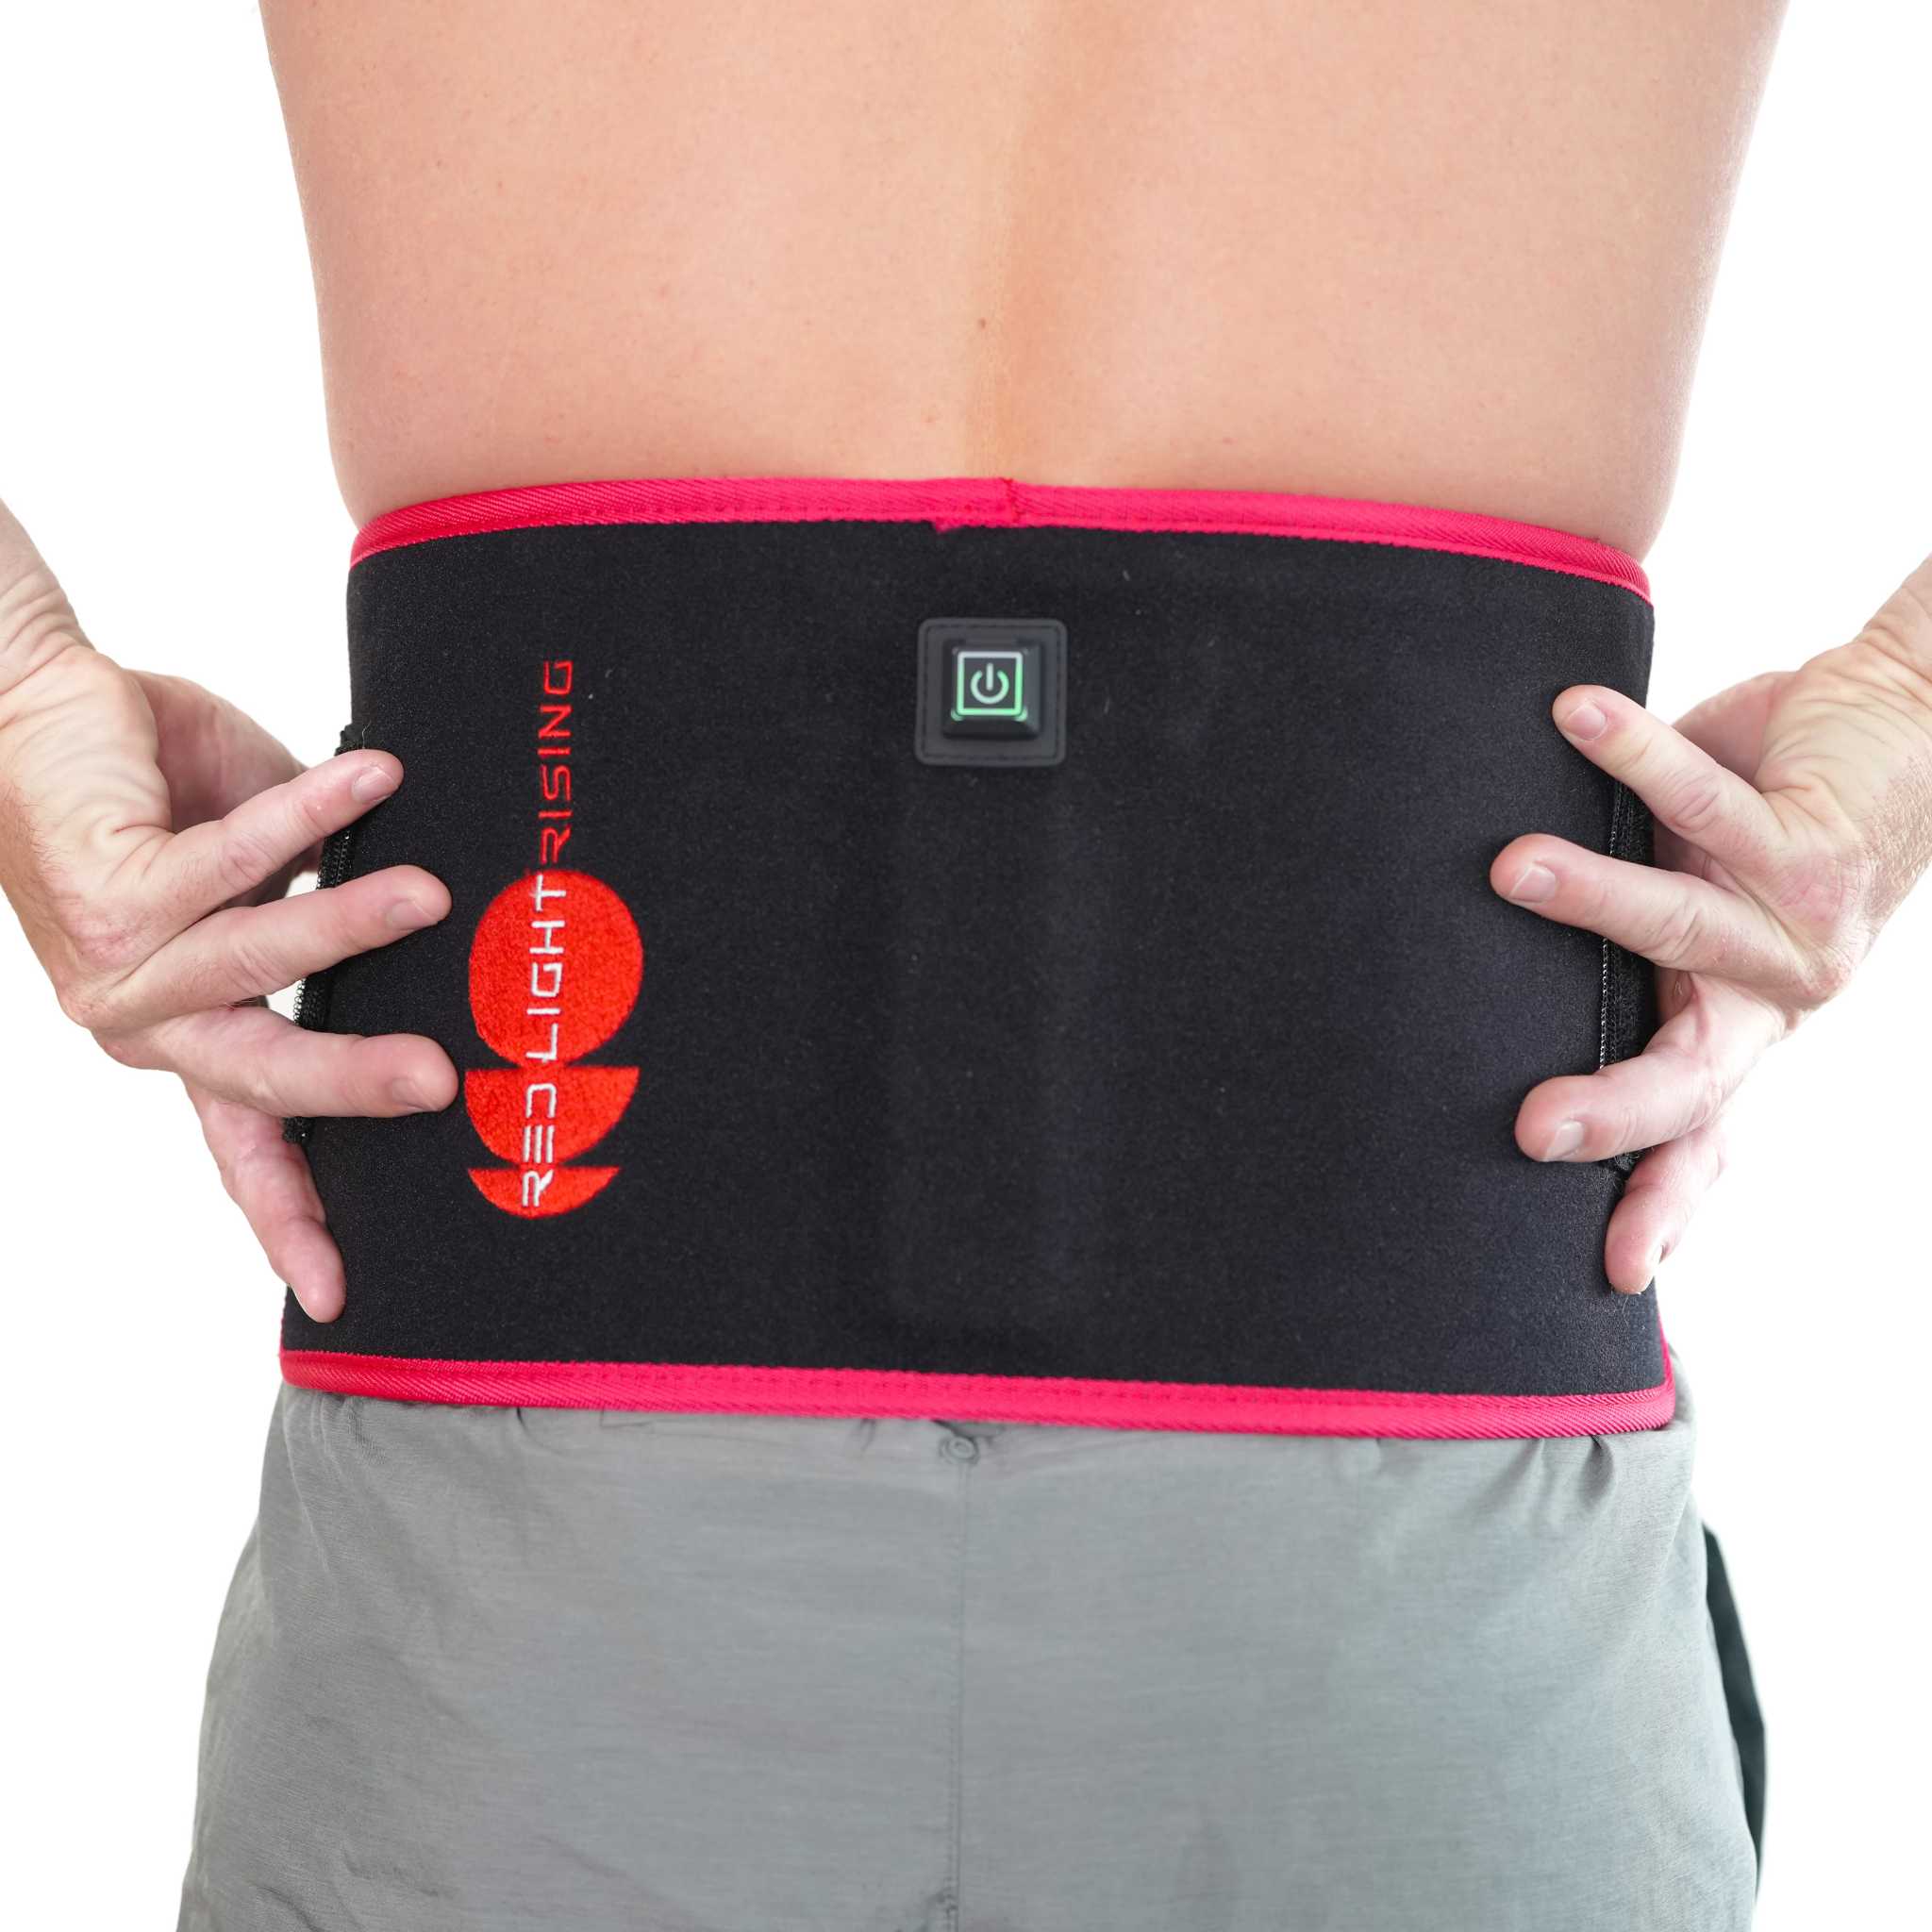 Lower back pain relief with flexible red light therapy pad